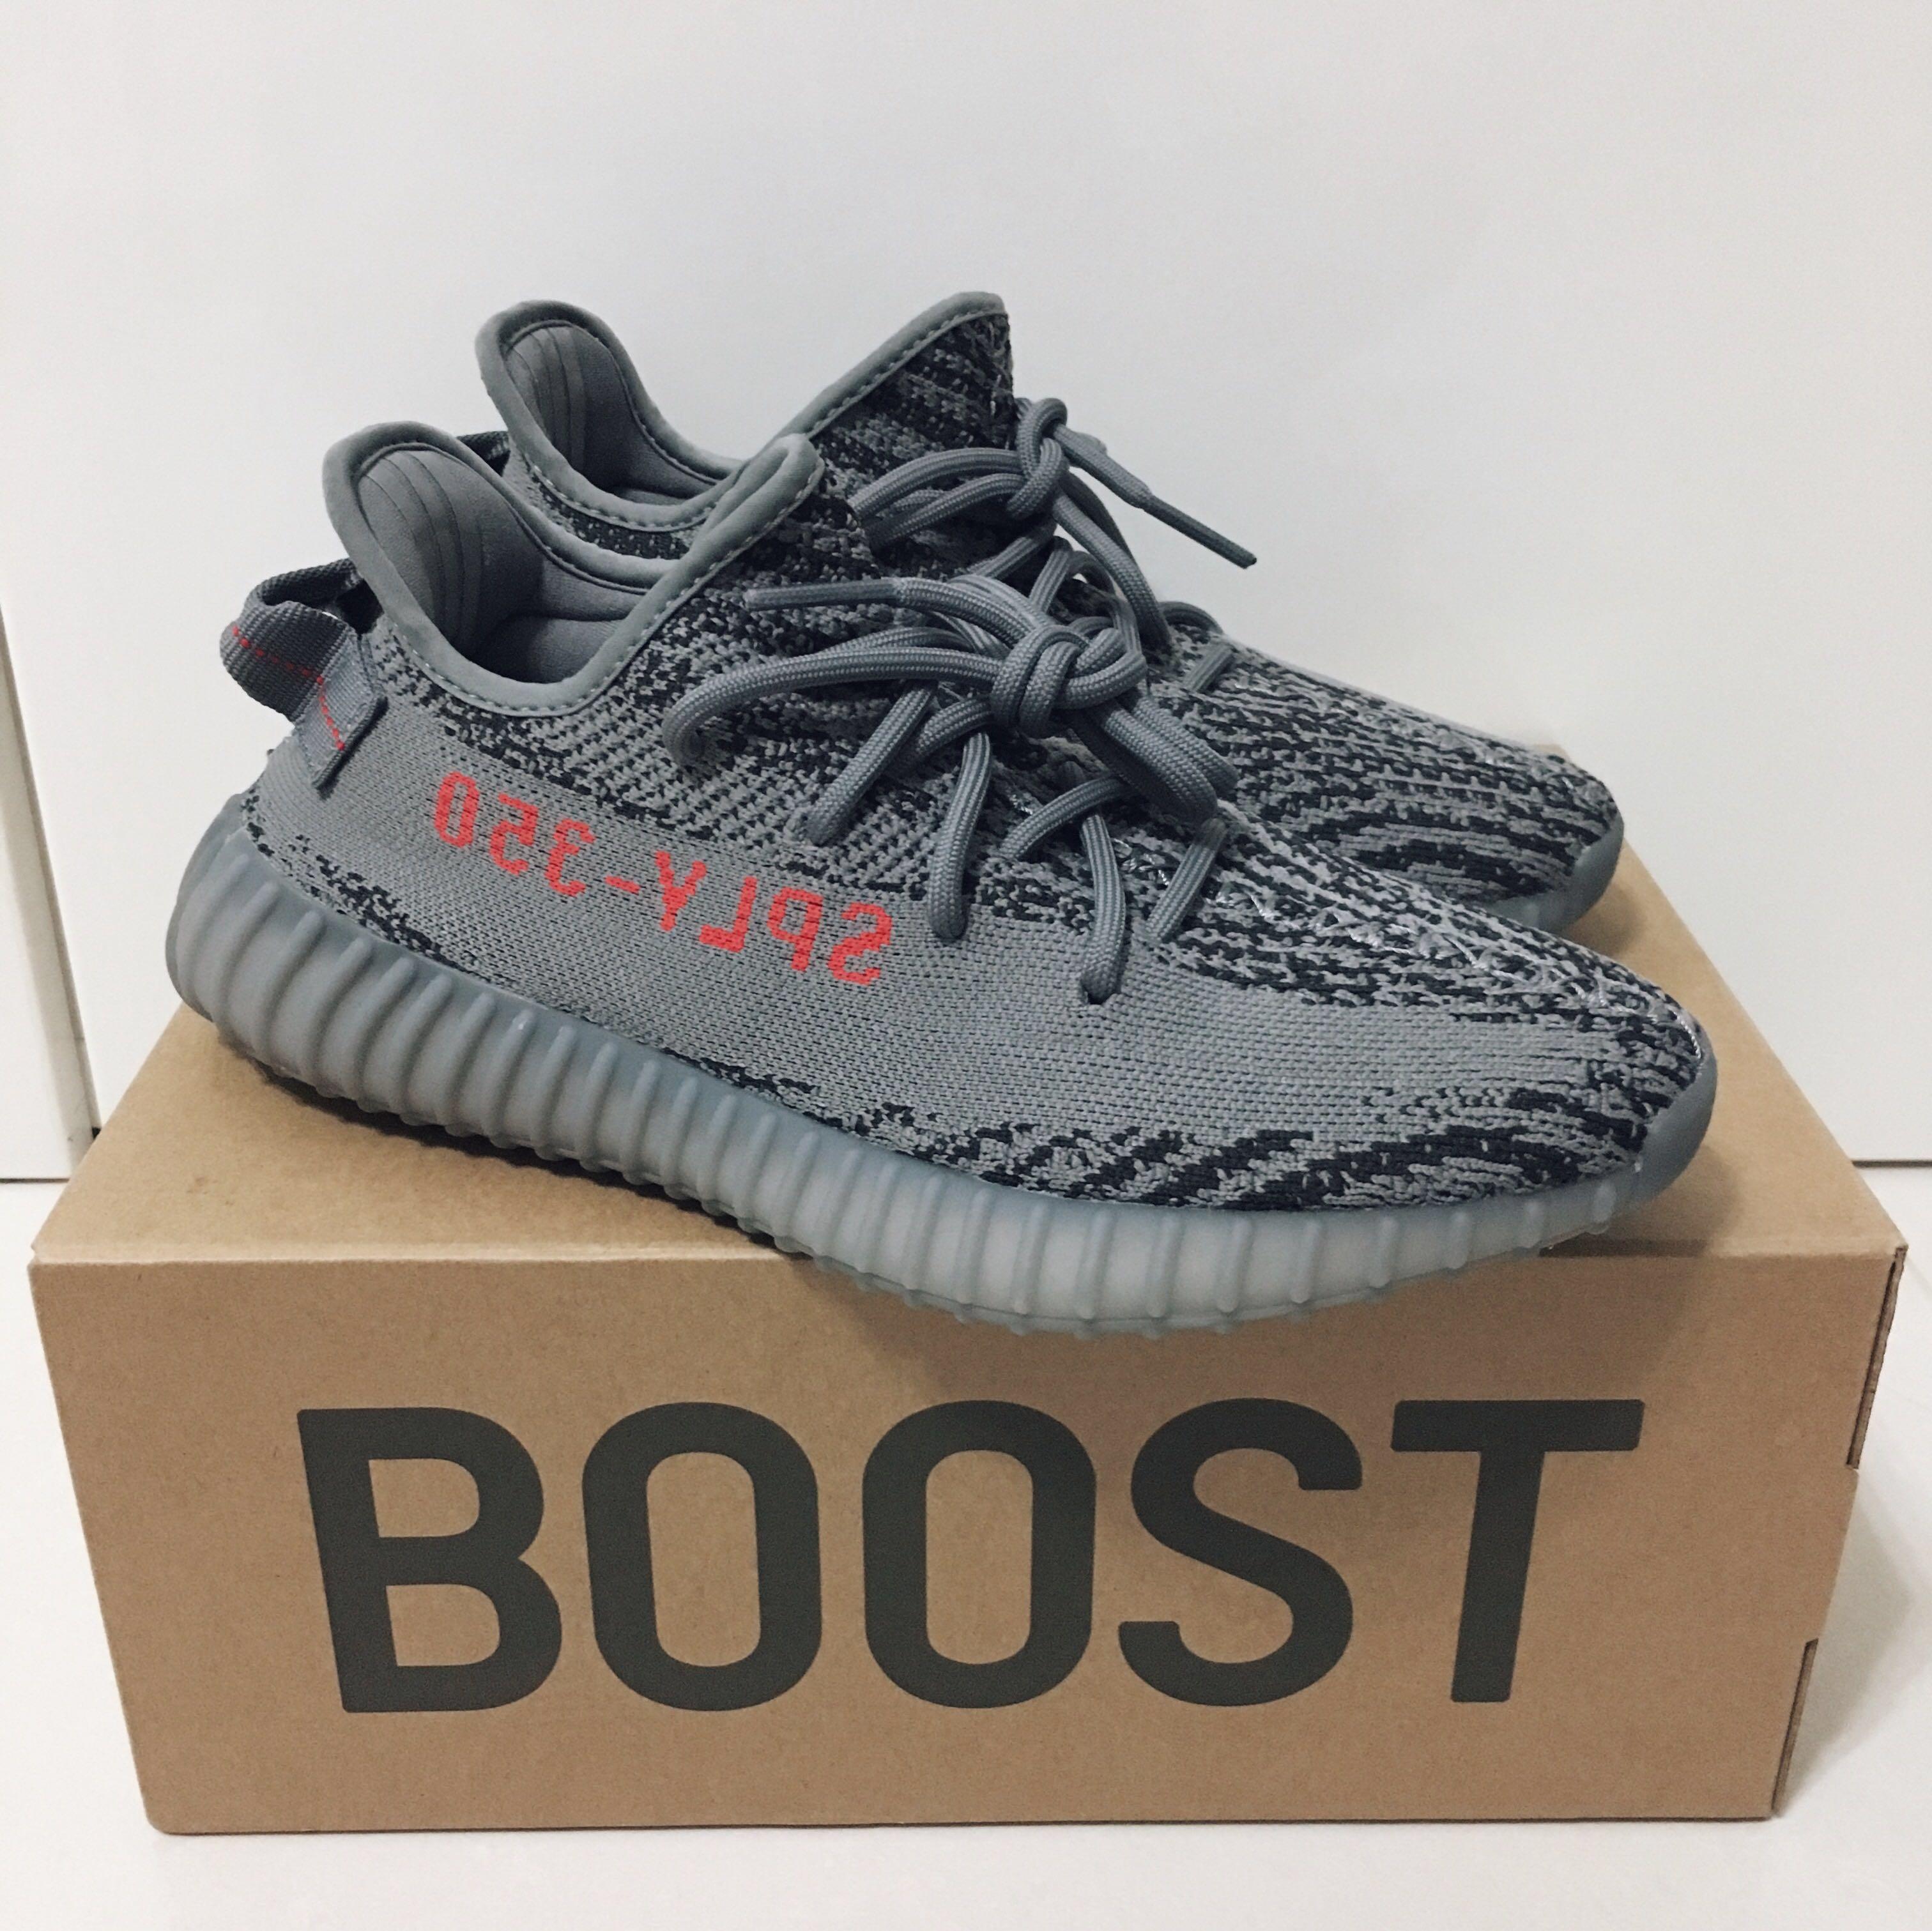 second hand yeezys for sale